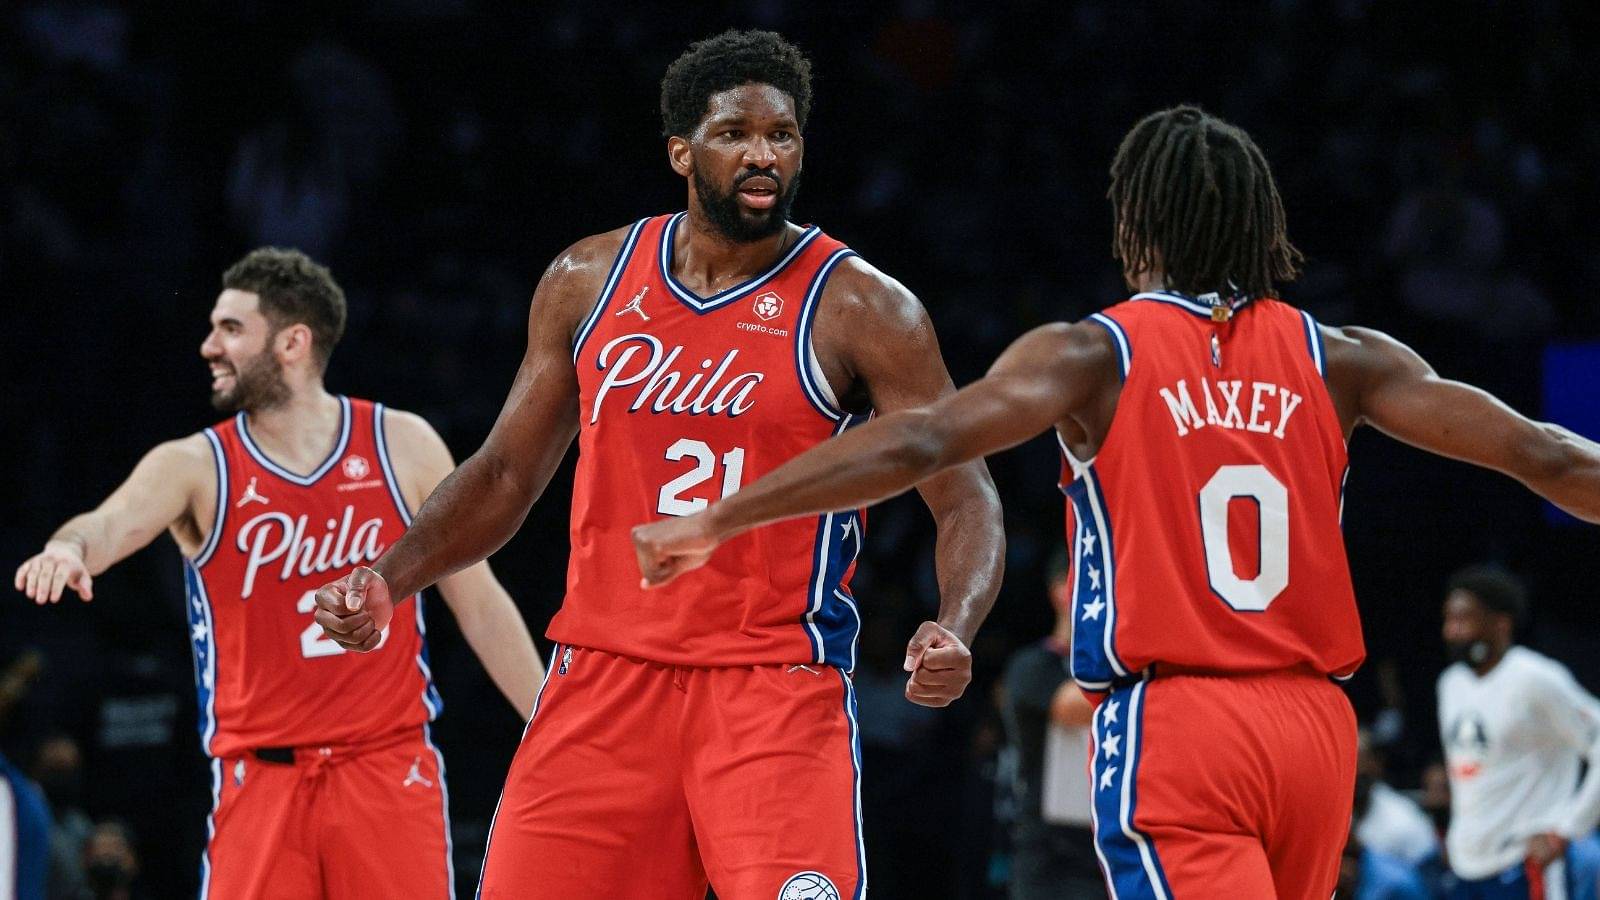 “Joel Embiid is the most clutch player in the NBA”: How the Sixers All-Star has scored the most points in the NBA in crunch time